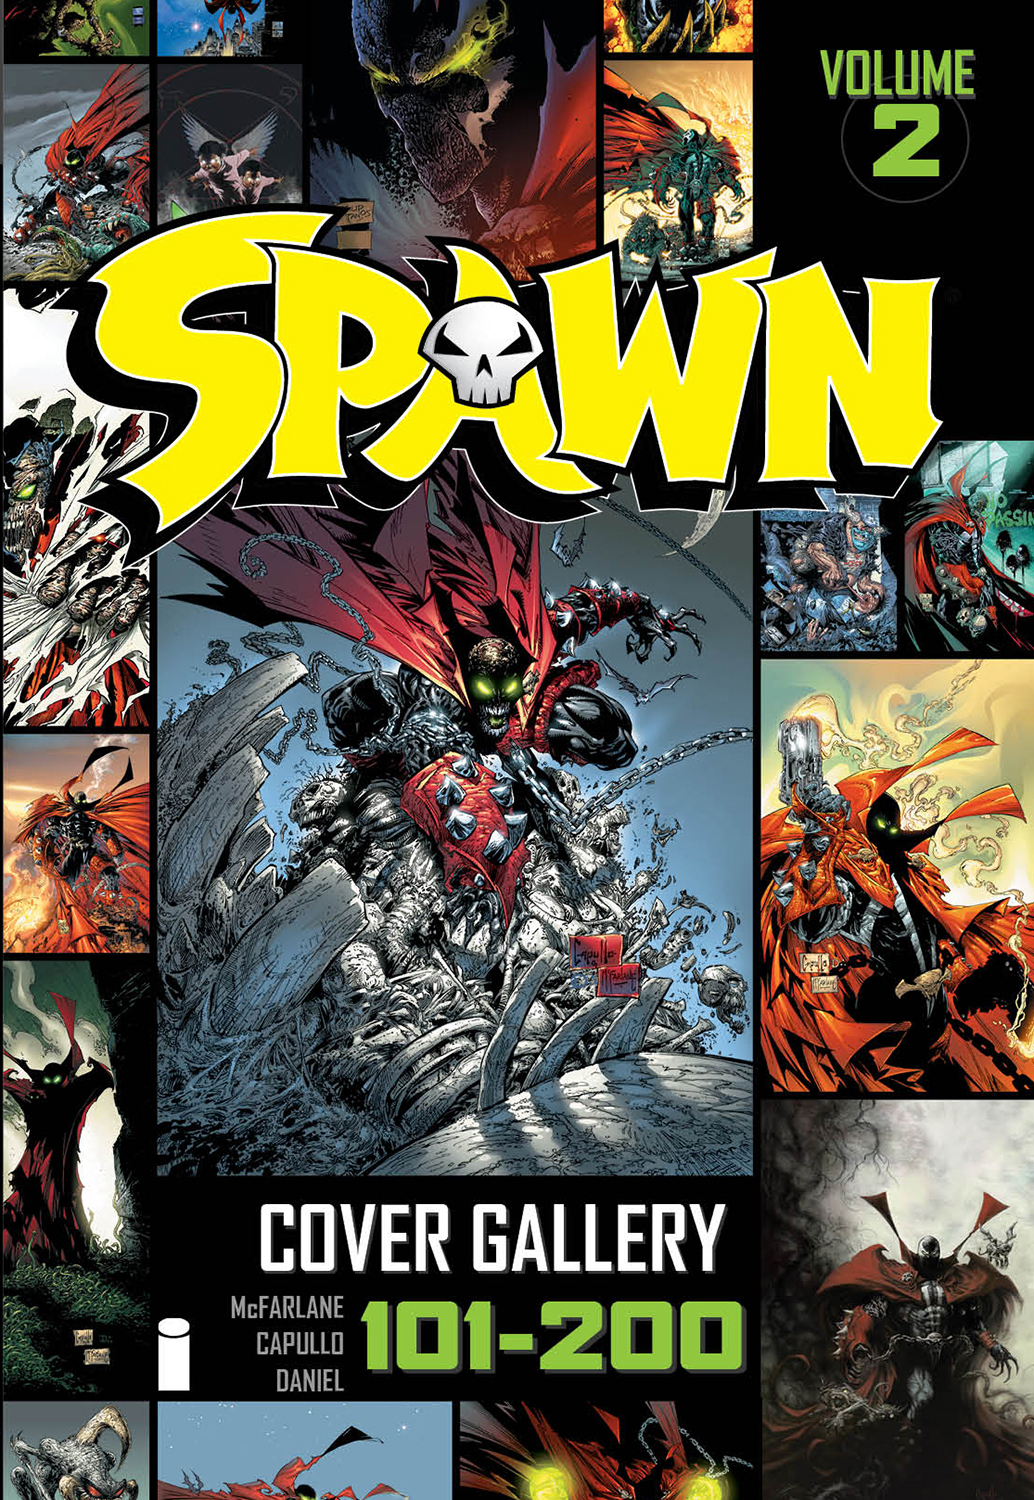 Spawn Cover Gallery Hardcover Volume 2